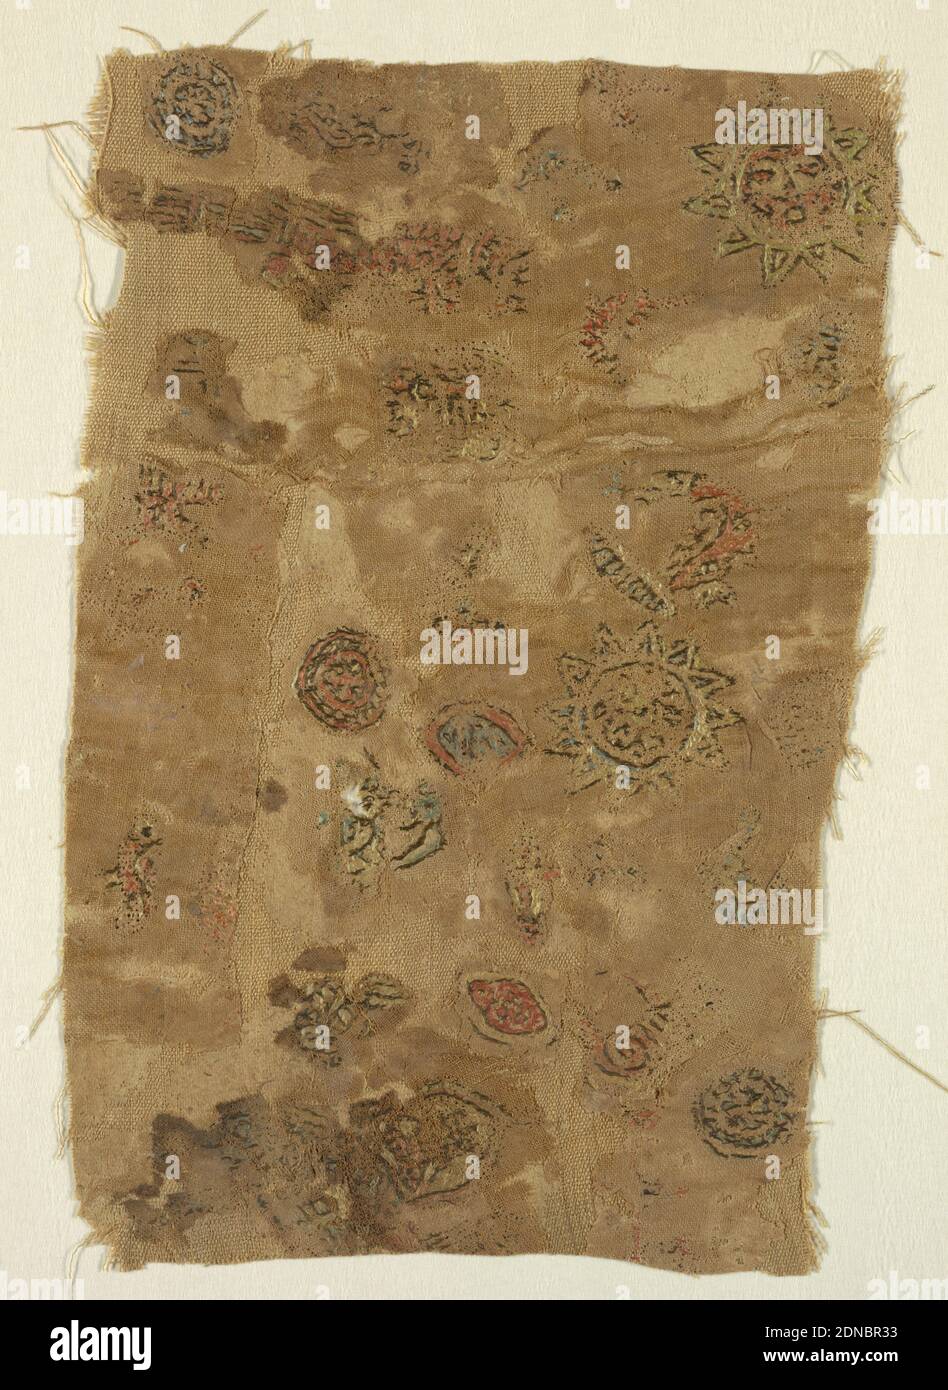 Fragment, Medium: silk on linen Technique: embroidered, 13th century, embroidery & stitching, Fragment Stock Photo